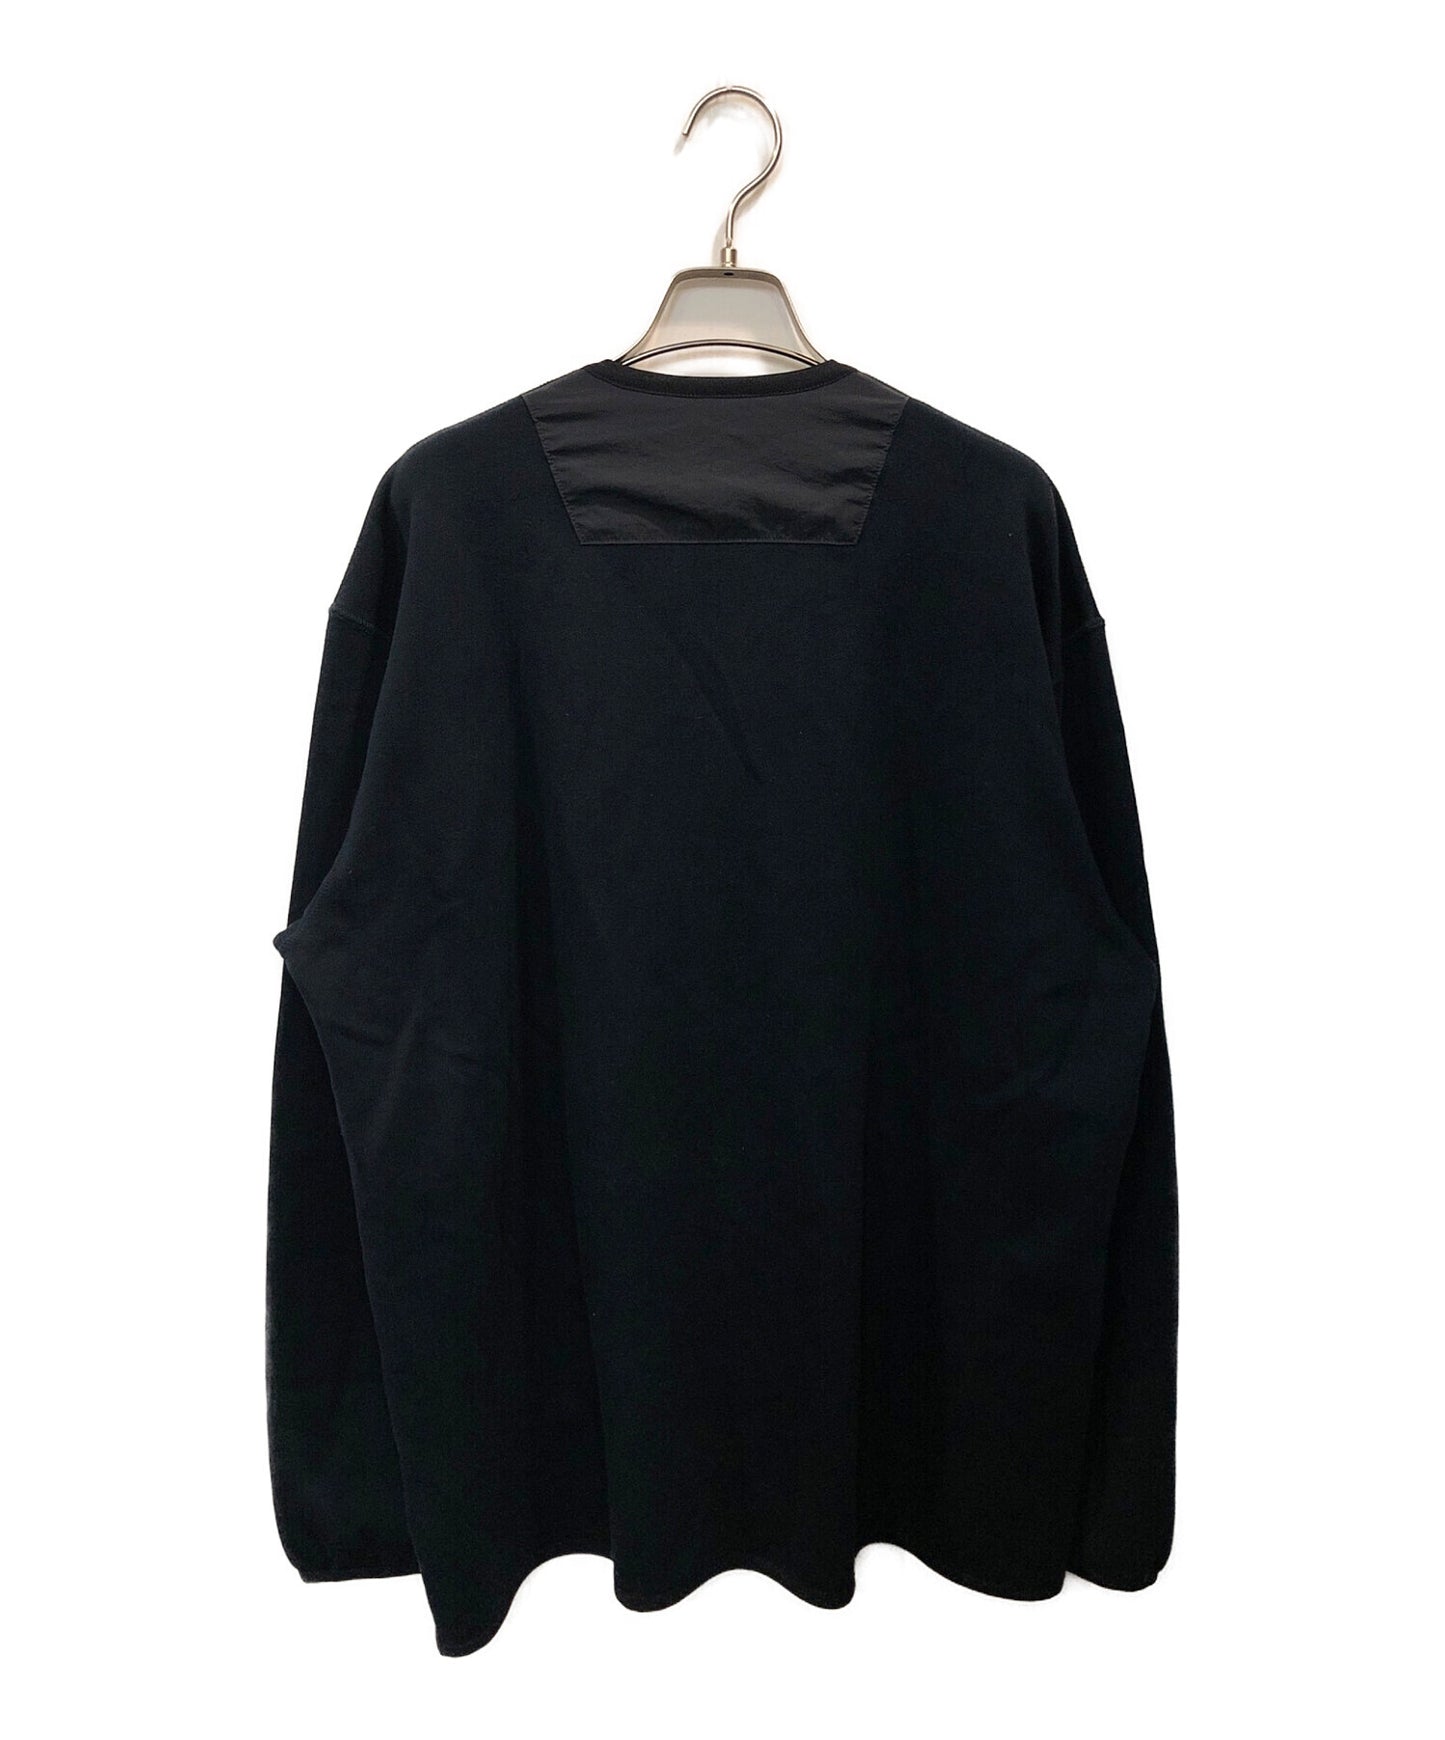 Comme des Garcons Homme Cotton 가득 채운 저지 군사적 라이너 HK-T004